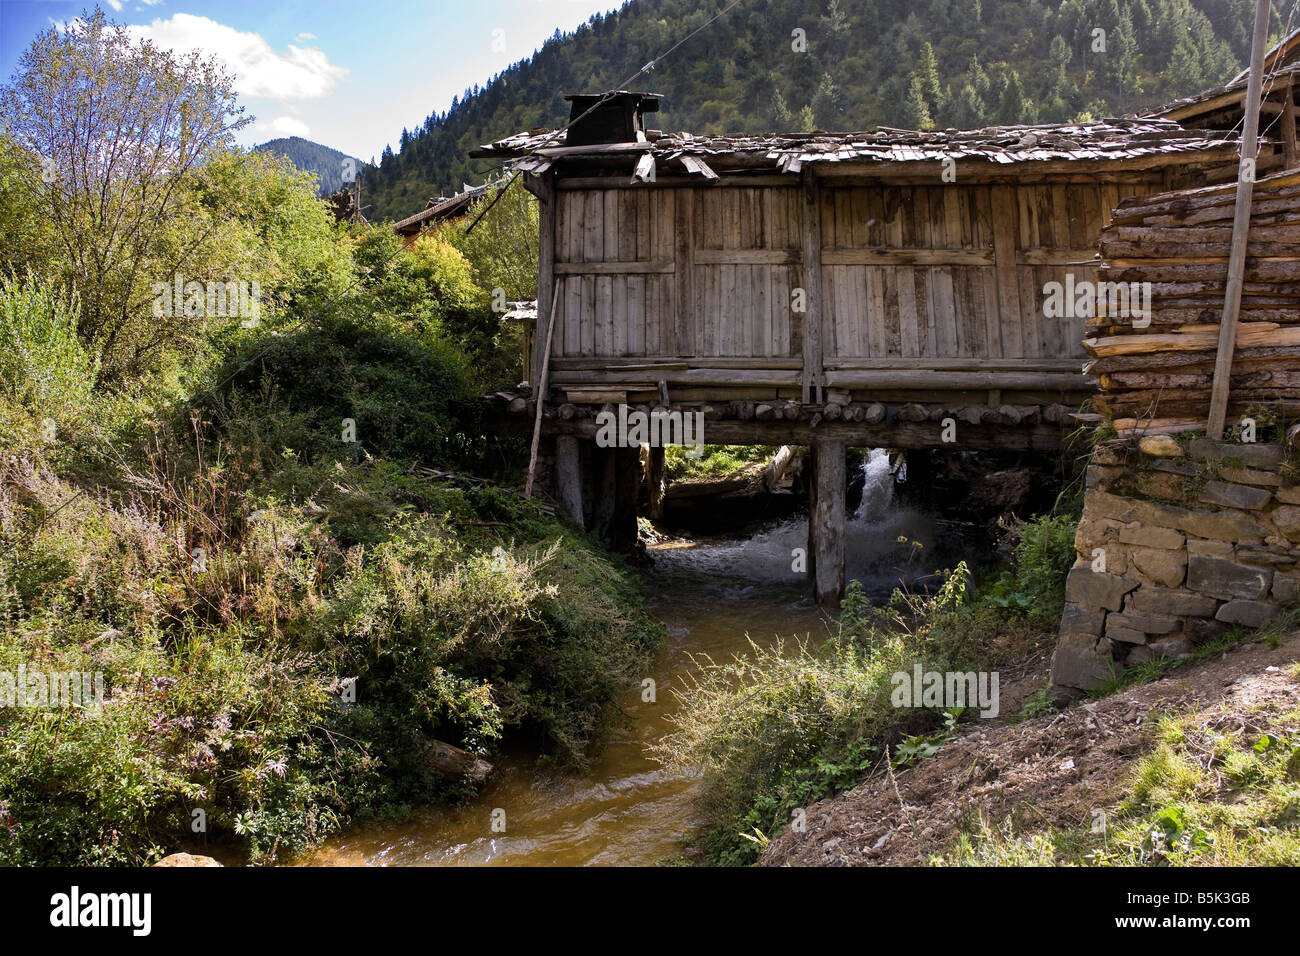 Wooden building built across river in Mounigou valley near Songpan in Sichuan Province China JMH3483 Stock Photo